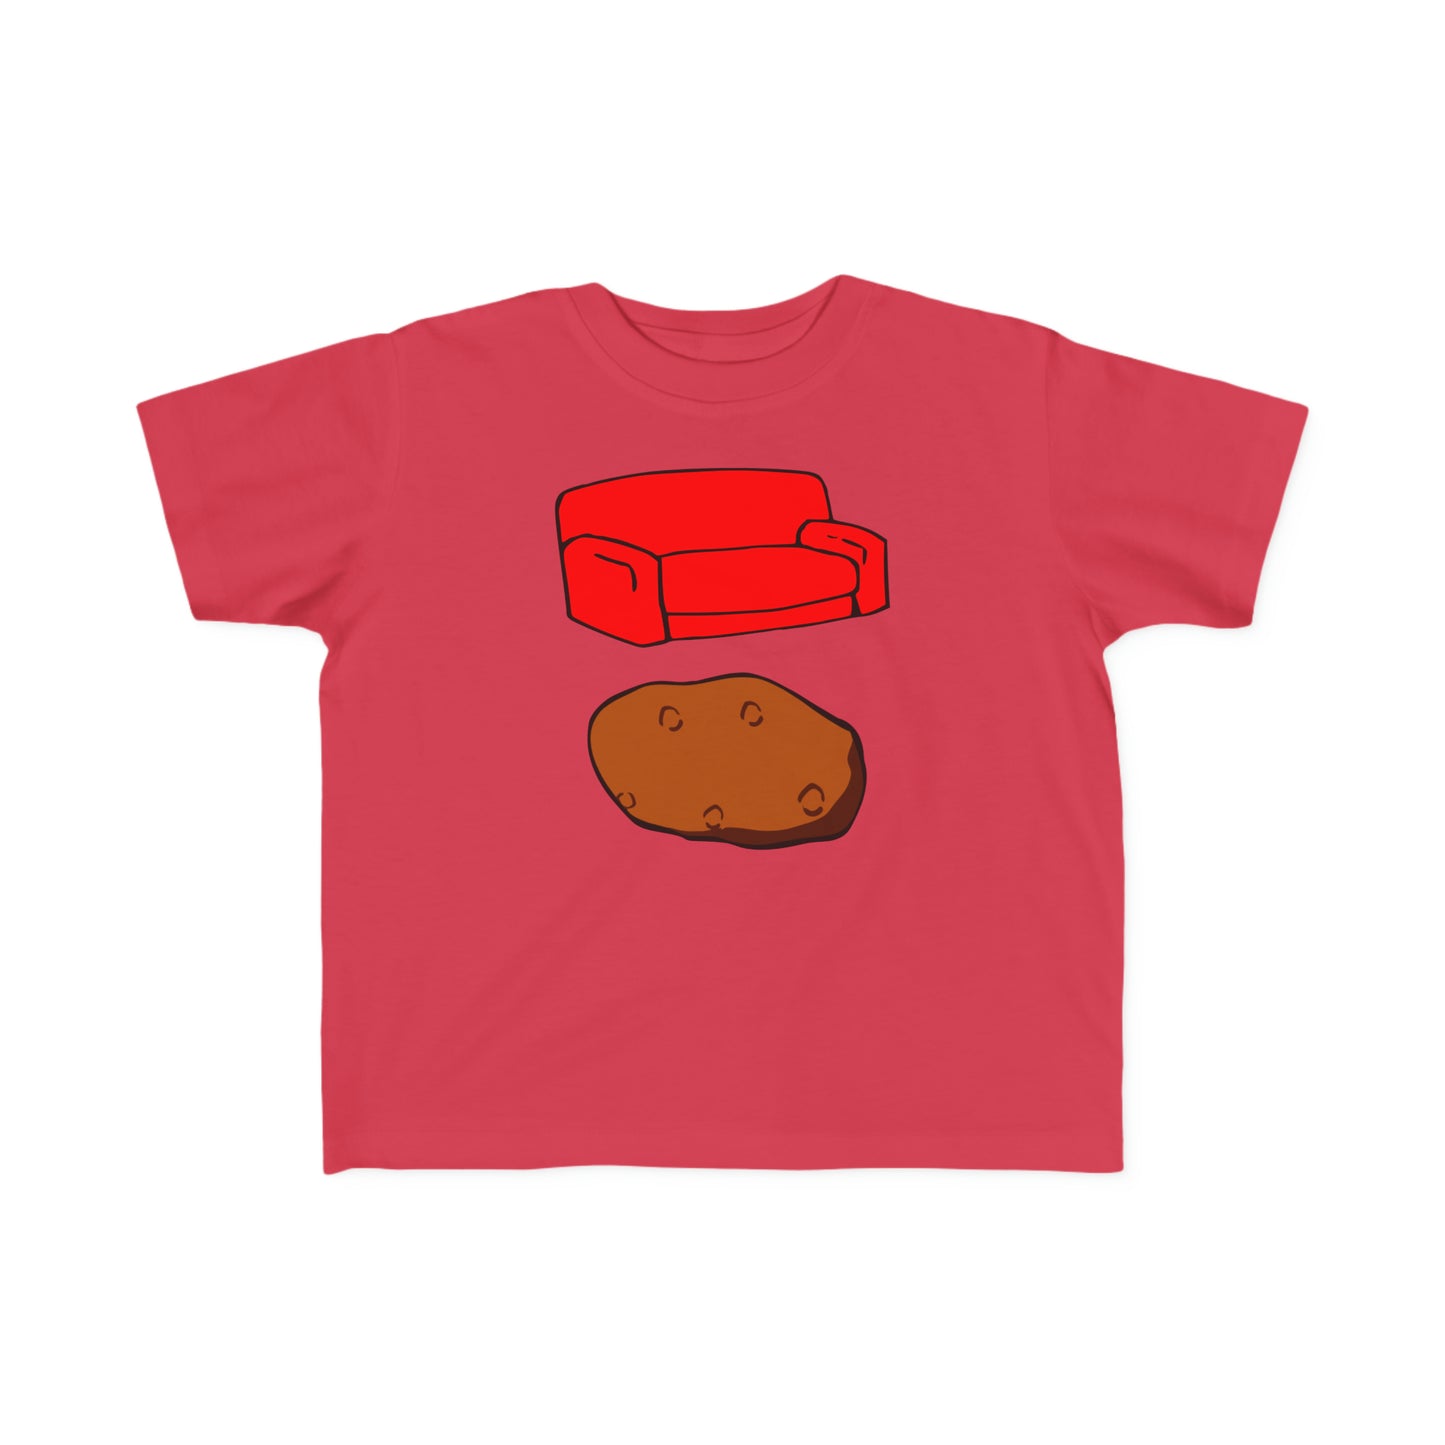 Couch Potato Toddler T-Shirt, Popular Football Team Colors, Graphic Tee showing Couch and a Potato, Baby Football Fan T-Shirt, Cute Baby Tee